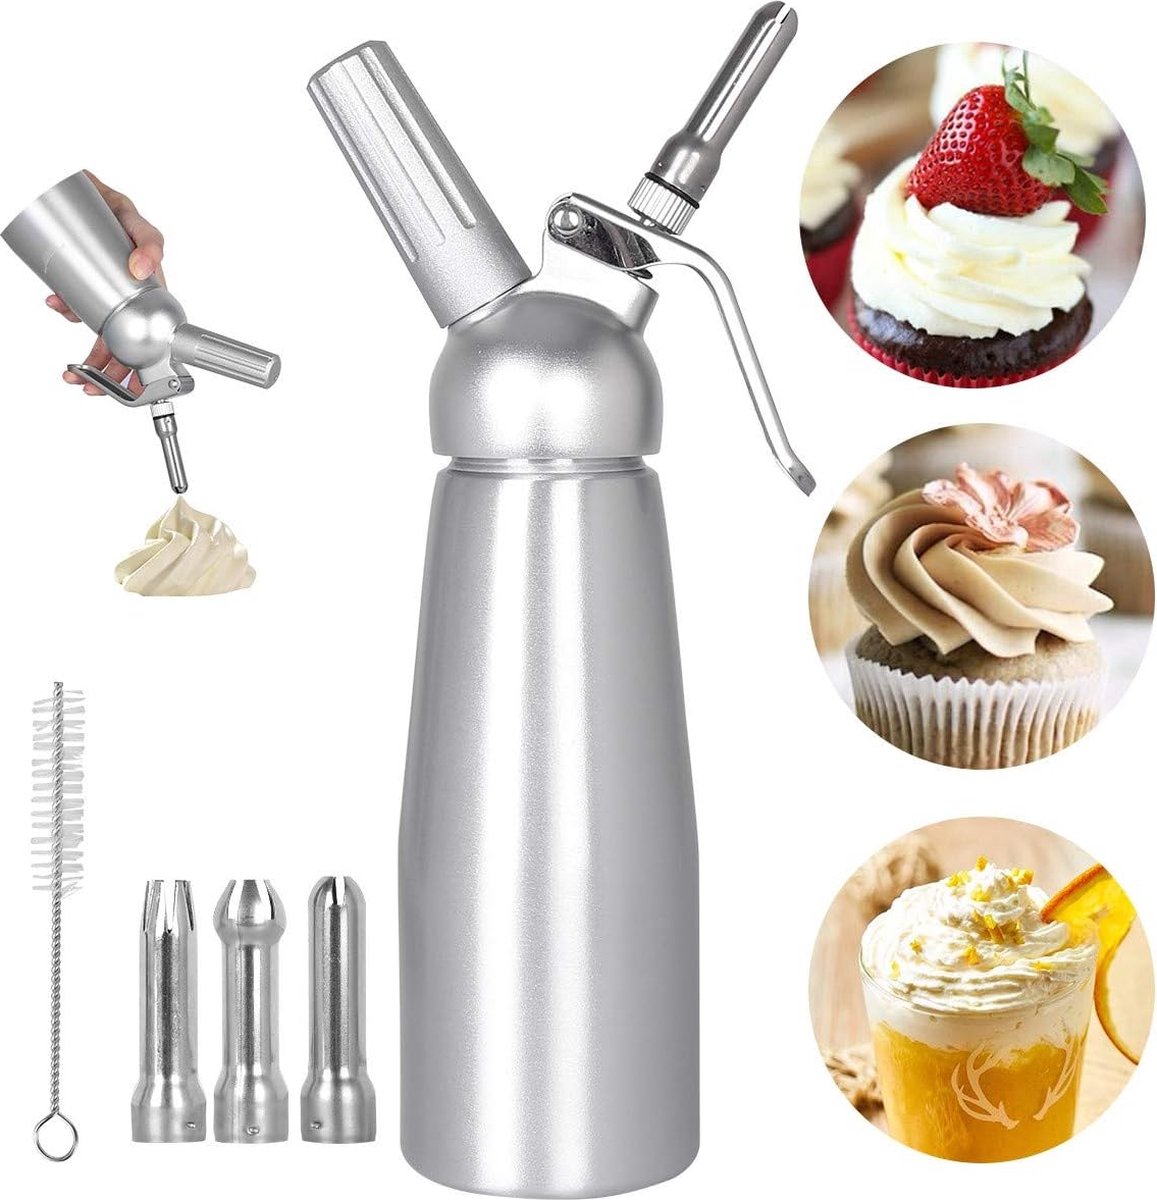 Stainless Steel Cream Dispenser 500 ml Cream Dispenser with Cartridge Whipped Cream Maker with 3 Stainless Steel Nozzles 1 Cleaning Brush Professional Cream Syphon Made of Aluminium